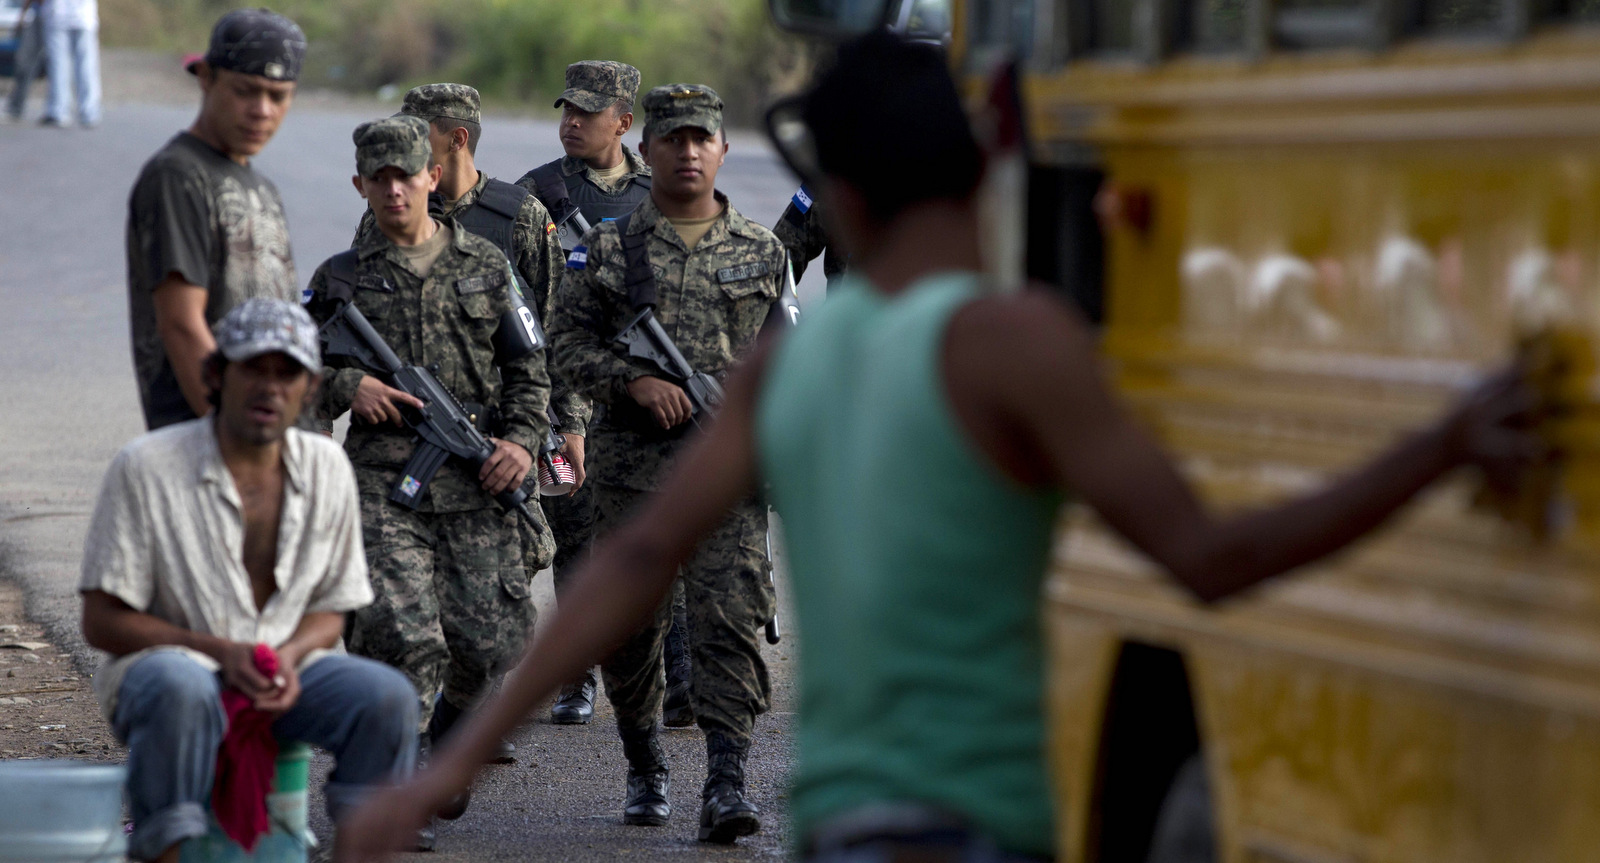 In this Nov. 16, 2013 photo, soldiers patrol at a bus terminal in Ulloa on the outskirts of Tegucigalpa, Honduras. Congress pushed through legislation creating a military police force to patrol the streets in place of the National Police. The program alarms human rights advocates concerned about potential abuses by the military acting in a civilian role, and the opposition says the presence of troops that supported a coup just four years ago is intimidating. (AP/Moises Castillo)